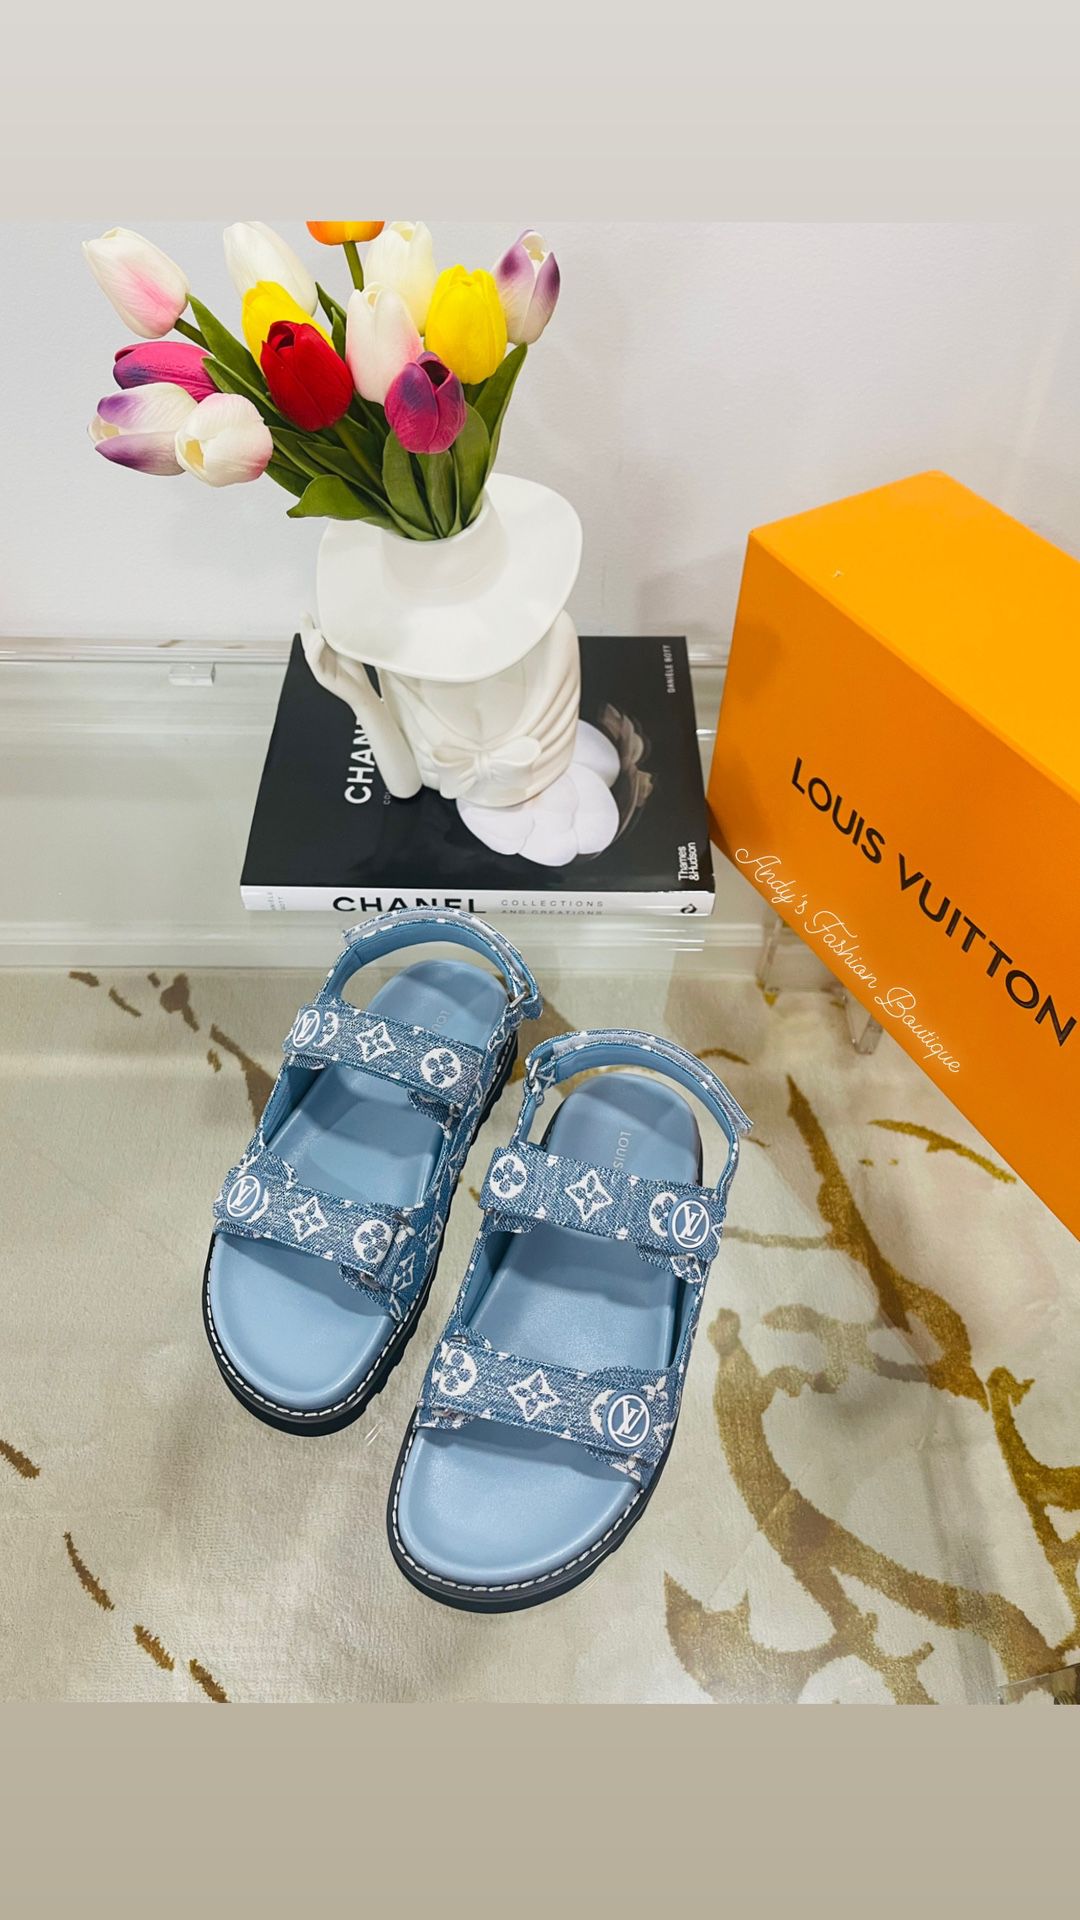 Supreme Louis Vuitton slides for Sale in New York, NY - OfferUp